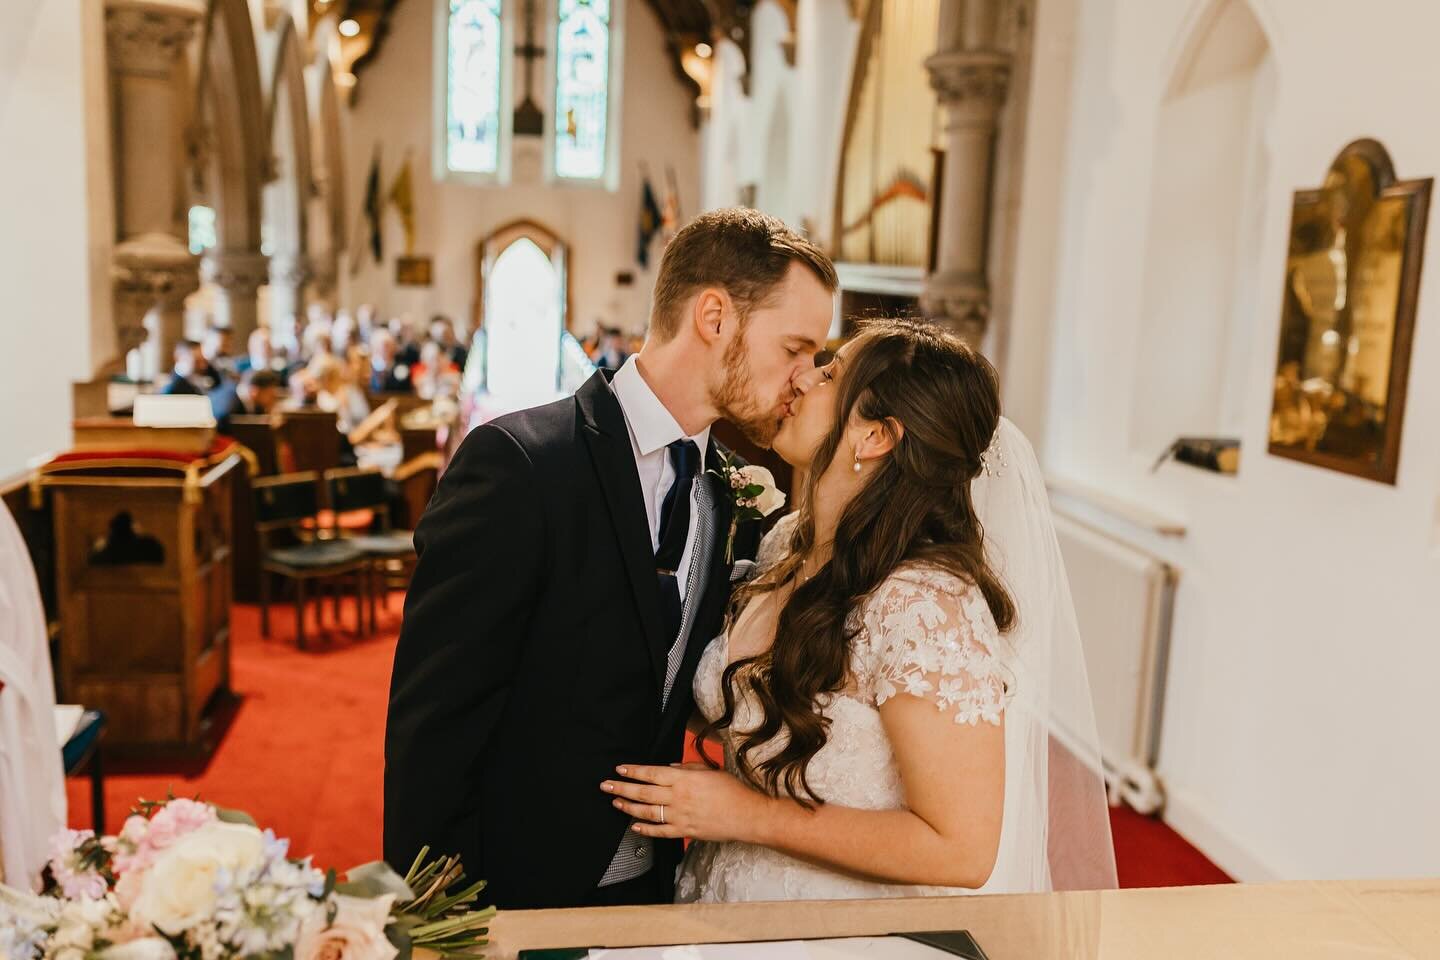 Take Time
When it comes to your kisses, try to hold them a bit longer than usual. Not only does this give me your photographer the perfect opportunity to capture the moment, but it also adds a touch of romance for the videographer. Trust me, those li